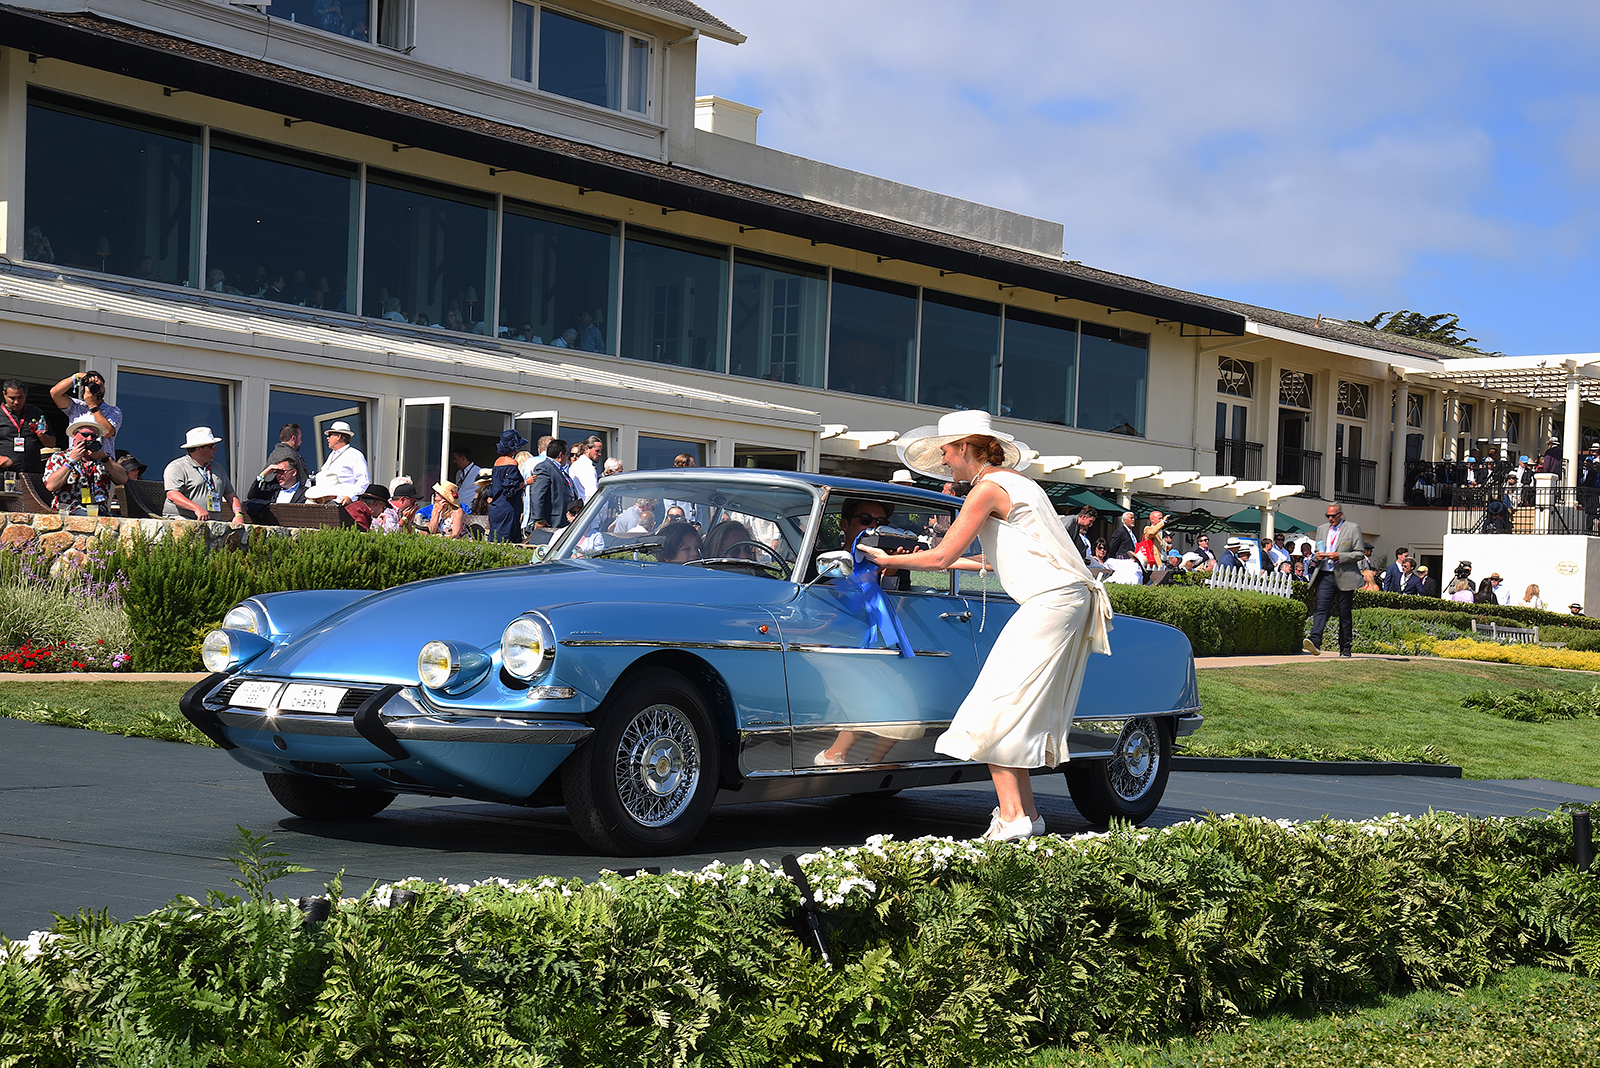 Classic & Sports Car – Alfa Romeo 8C crowned champion at Pebble Beach Concours d’Elegance